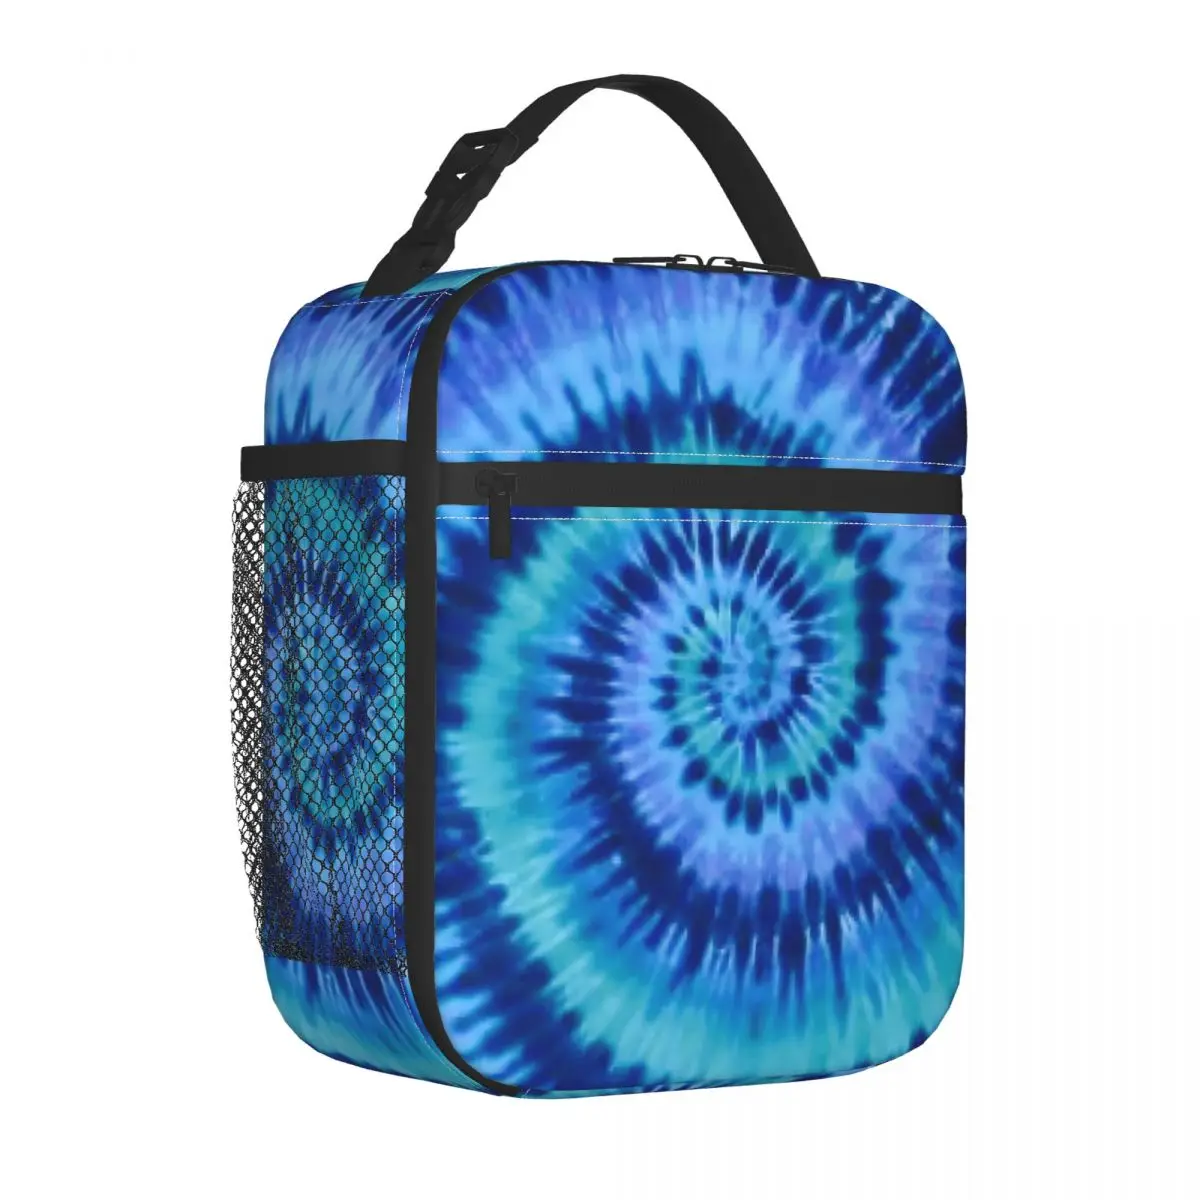 

Blue Tie Dye Lunch Bag Spiral Swirl Print Retro Lunch Box For Child Beach Convenient Cooler Bag Graphic Thermal Lunch Bags